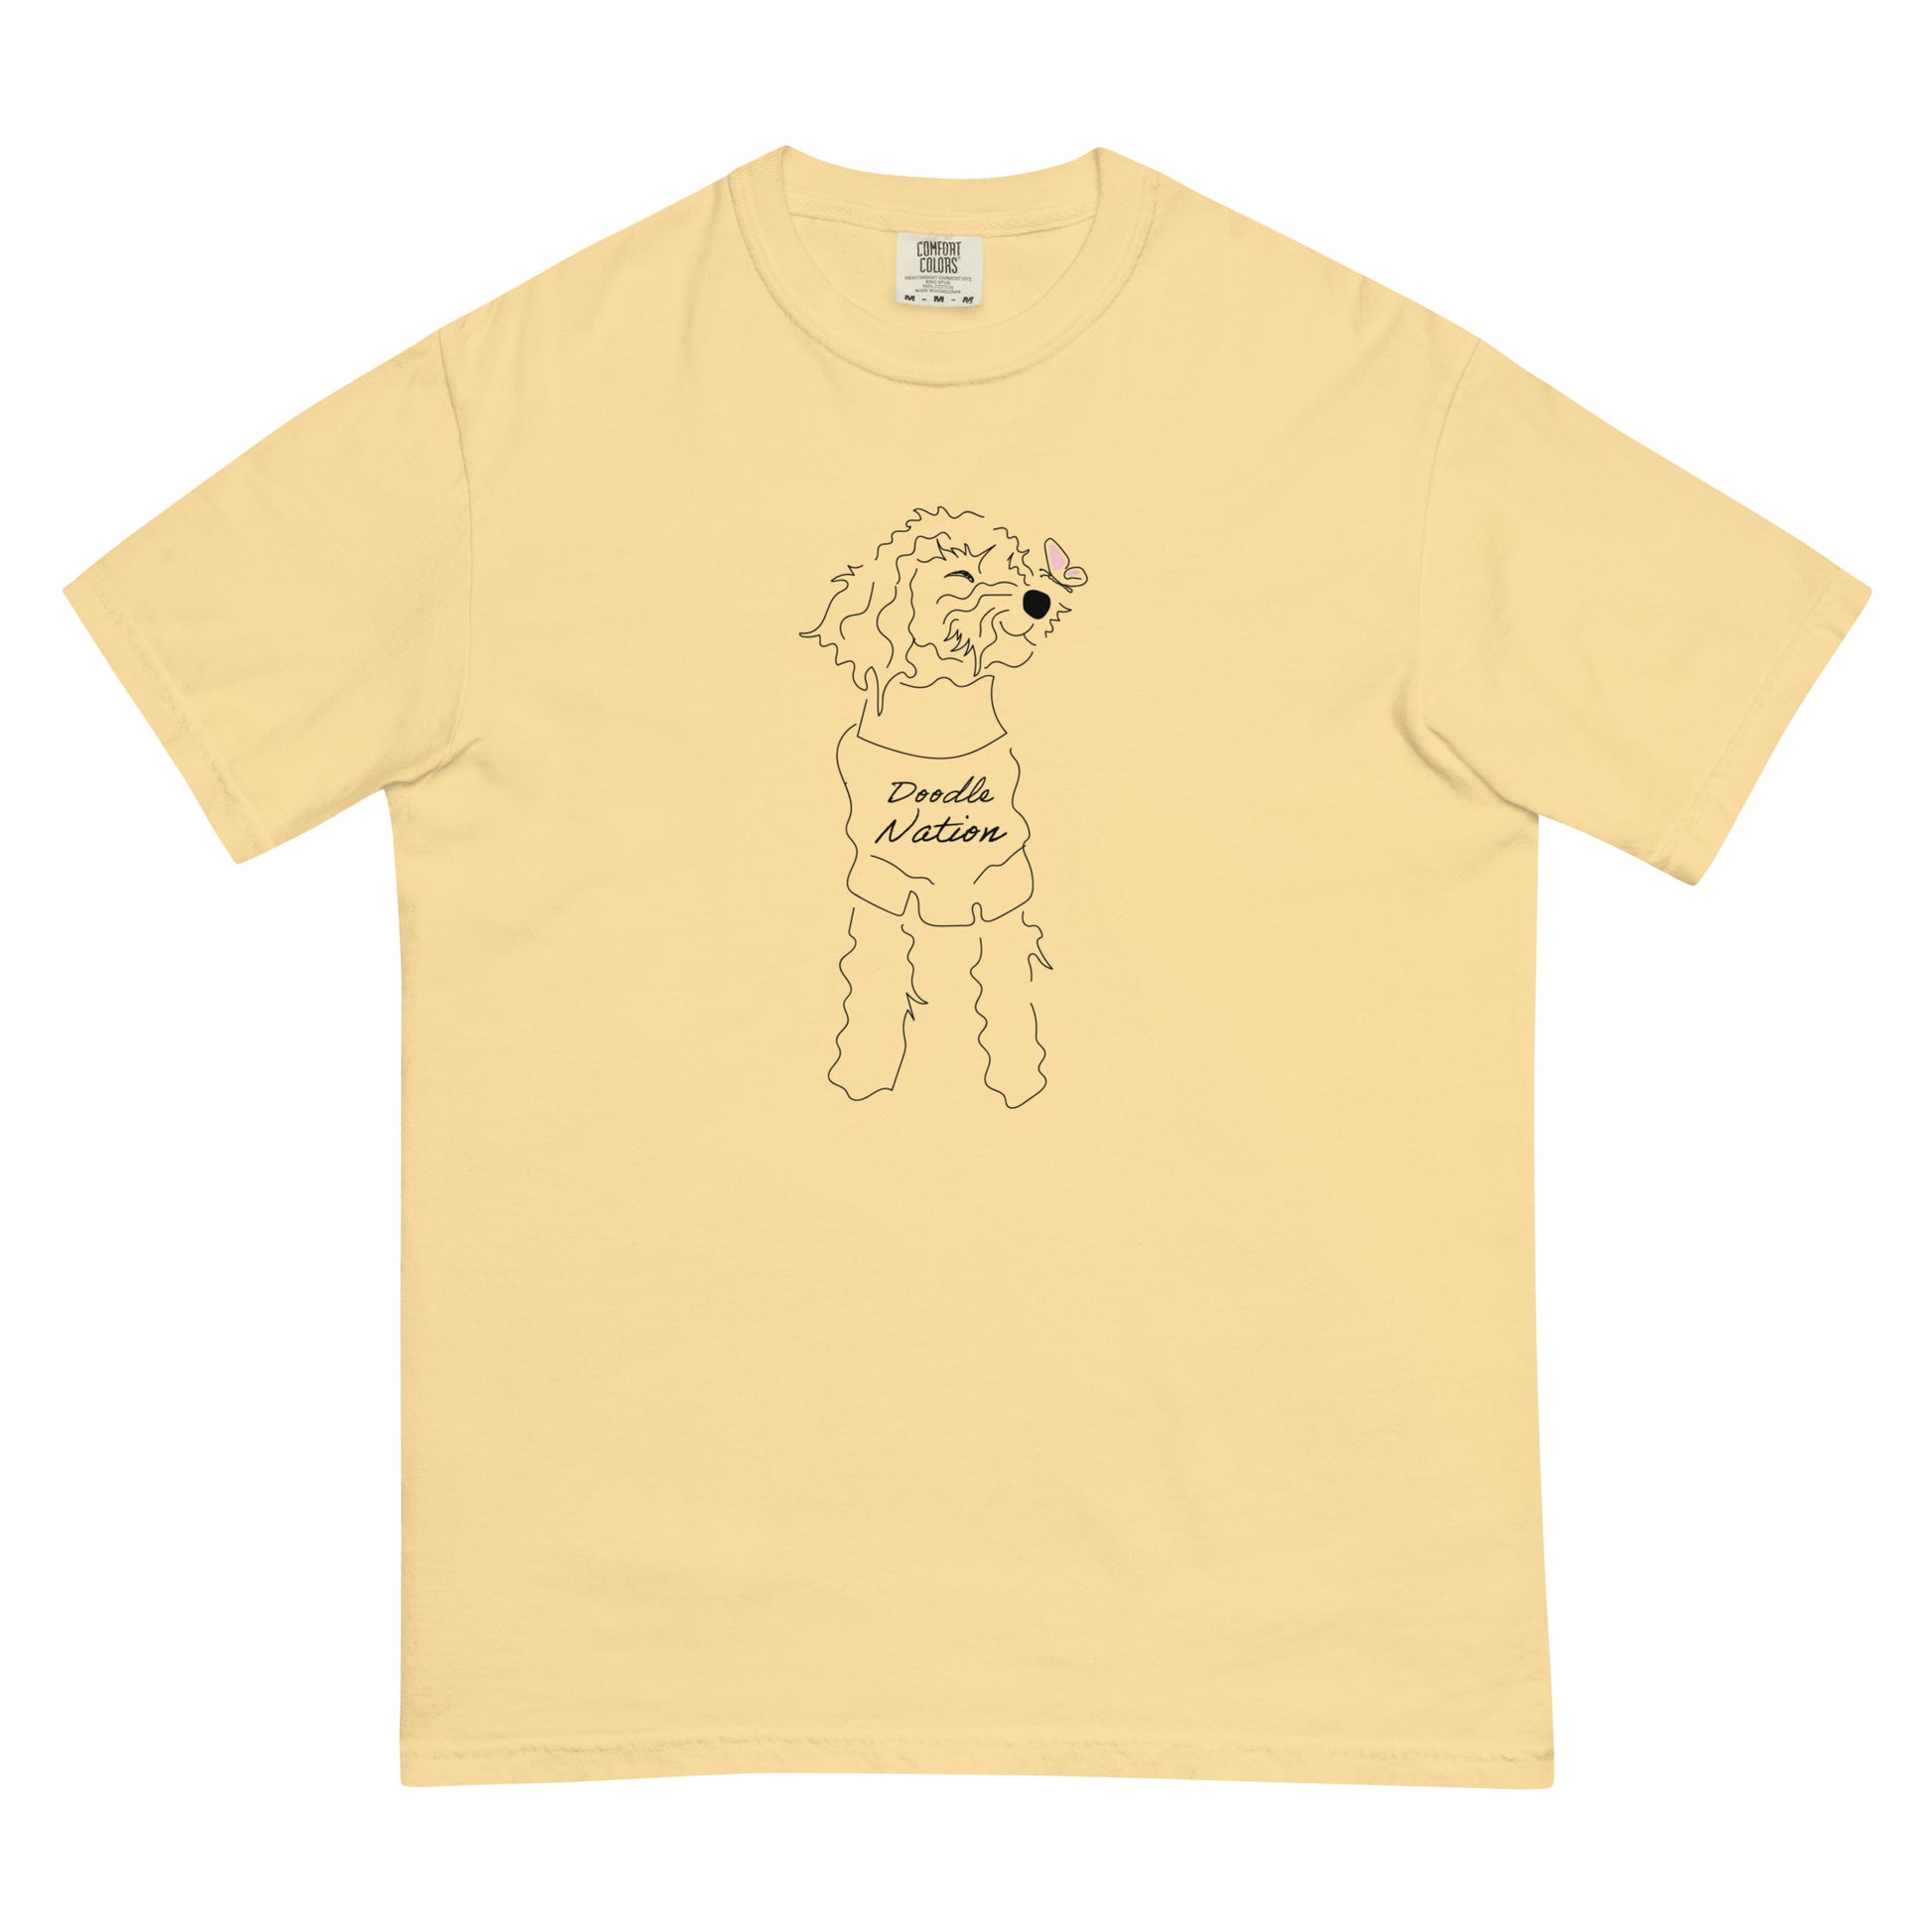 Goldendoodle comfort colors t-shirt with Goldendoodle dog and words "Doodle Nation" in butter color